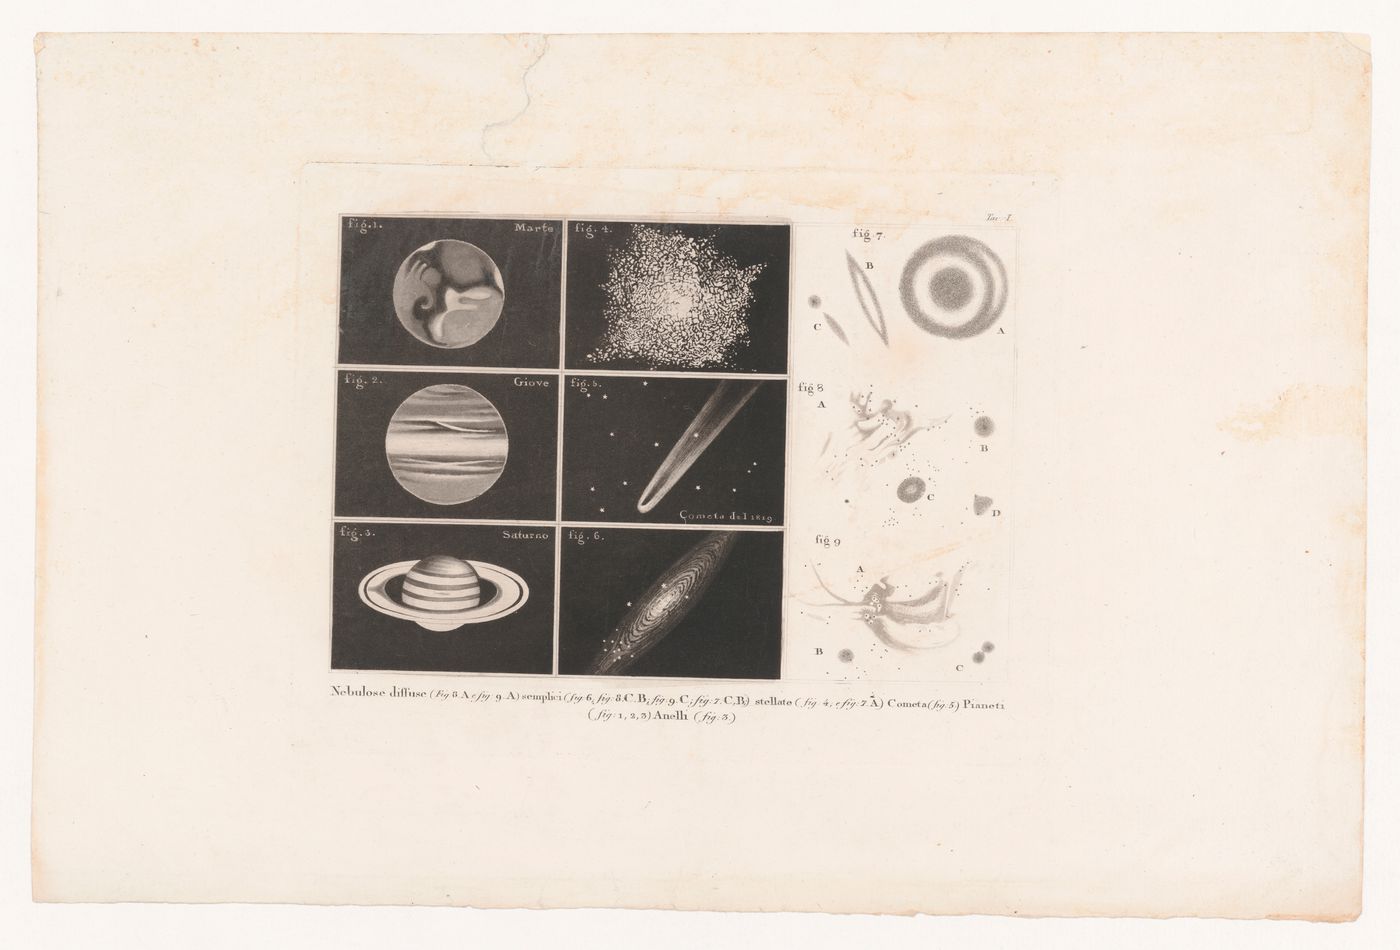 Figures of planets, comets and stars